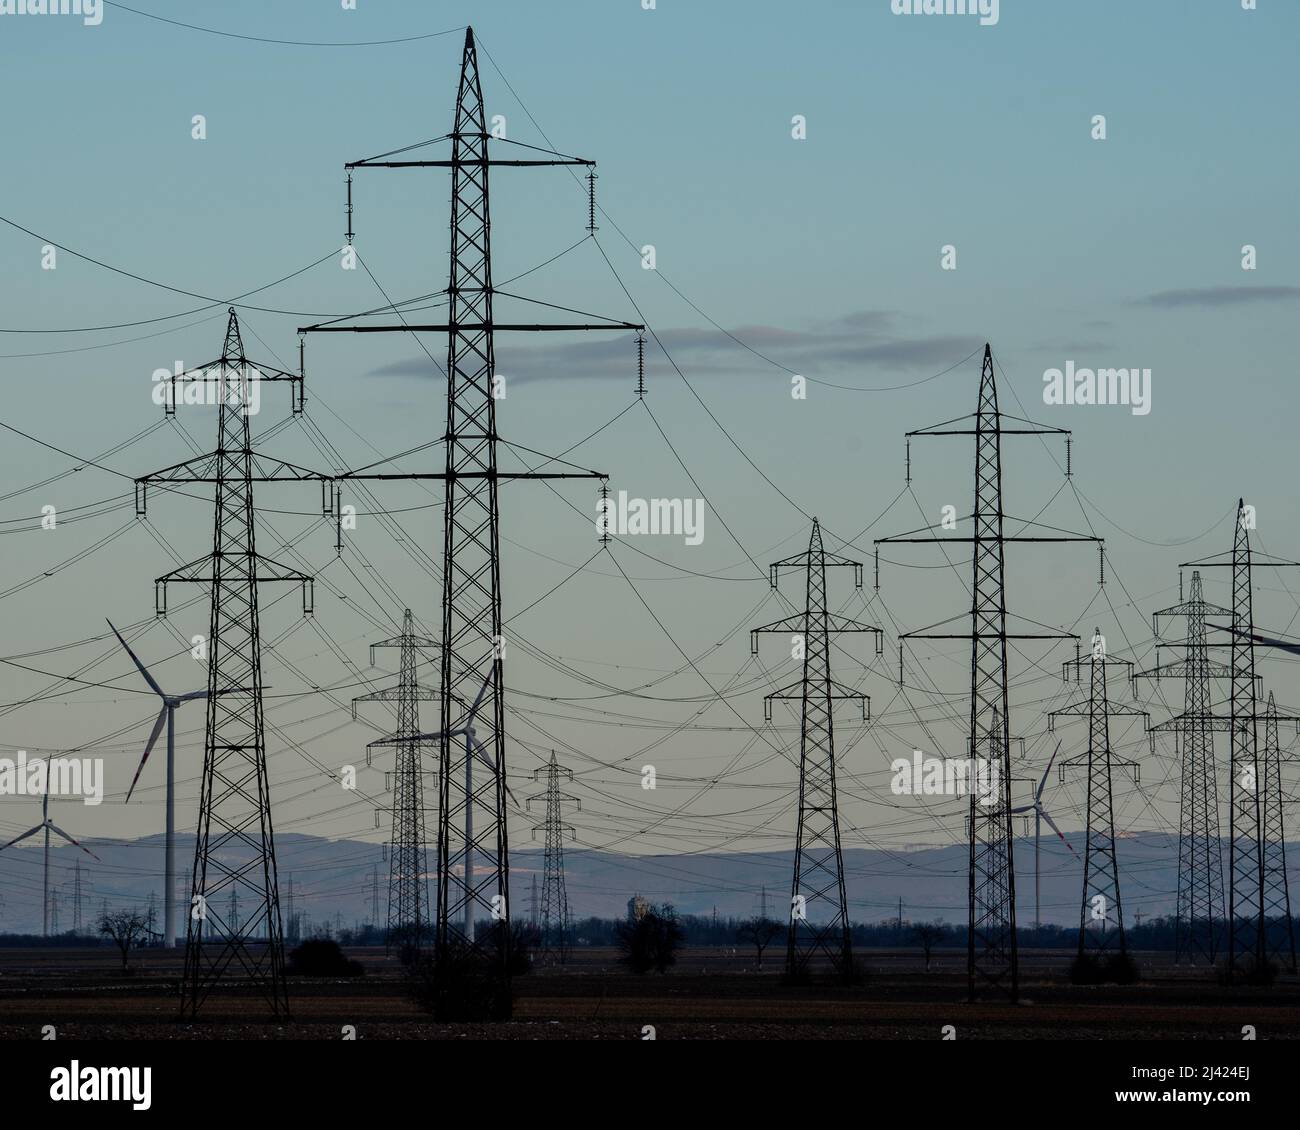 Power grid for energy supply Stock Photo